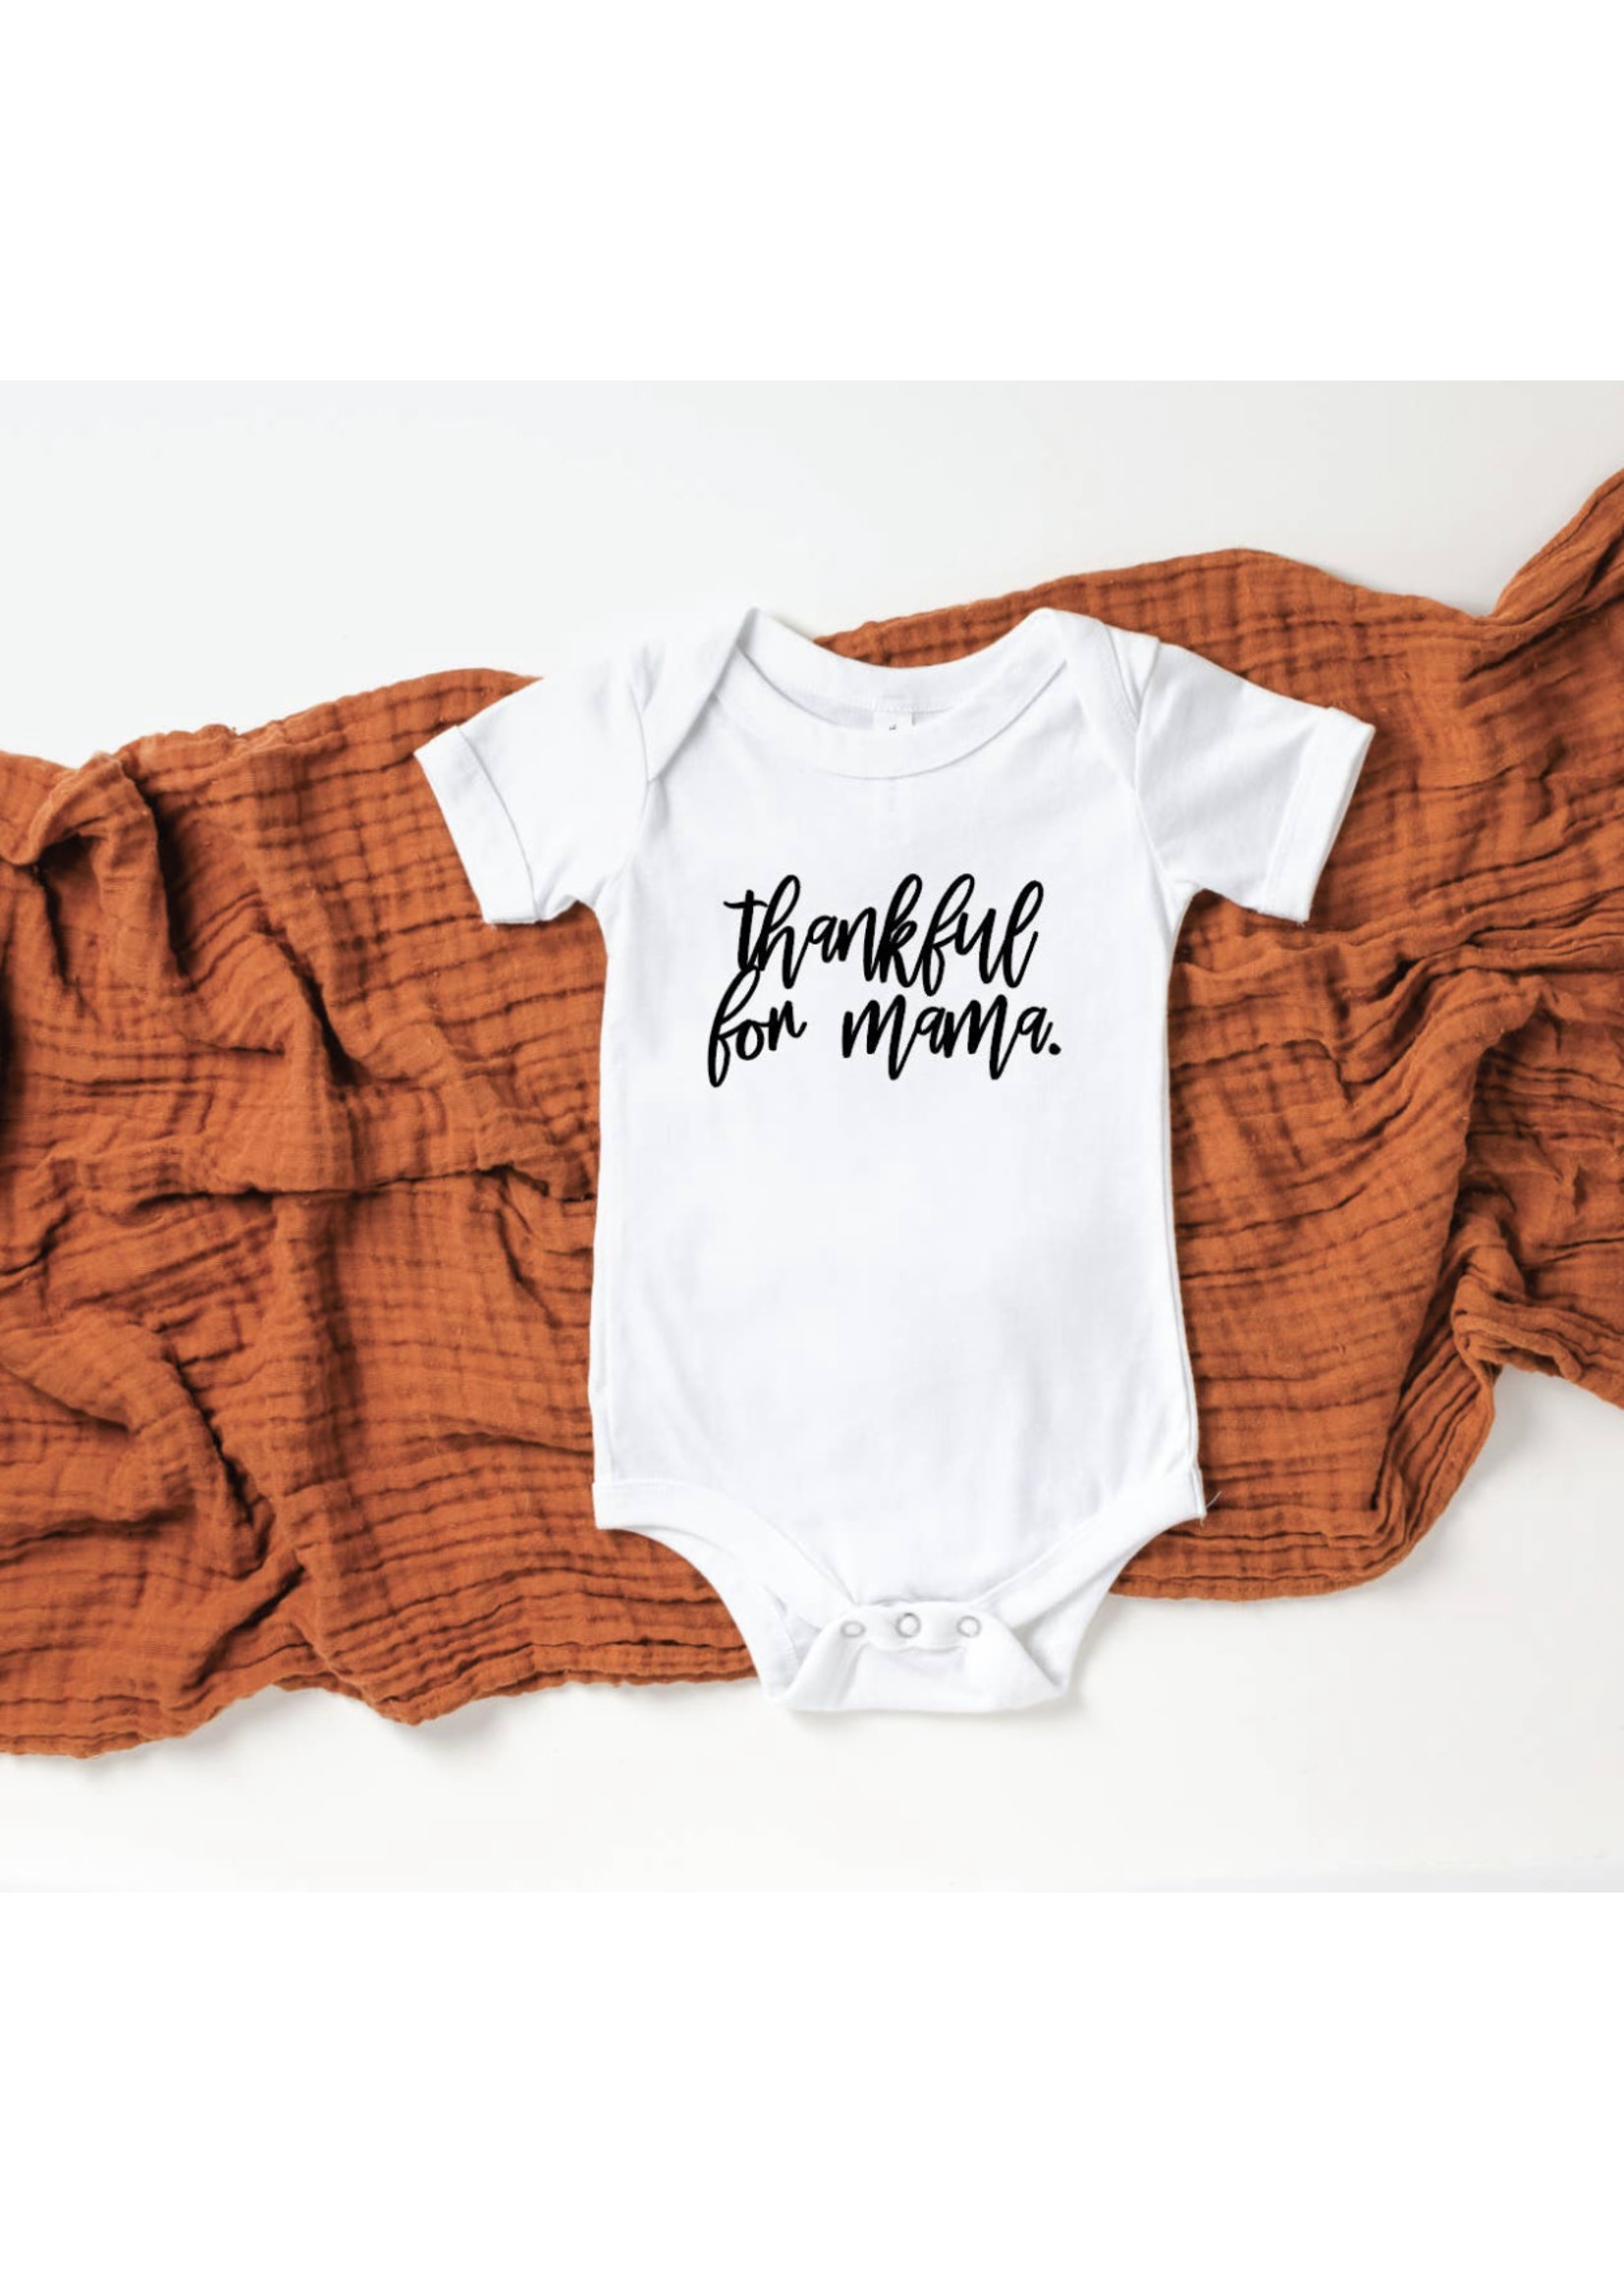 Saved By Grace Co Thankful for Mama Onesies